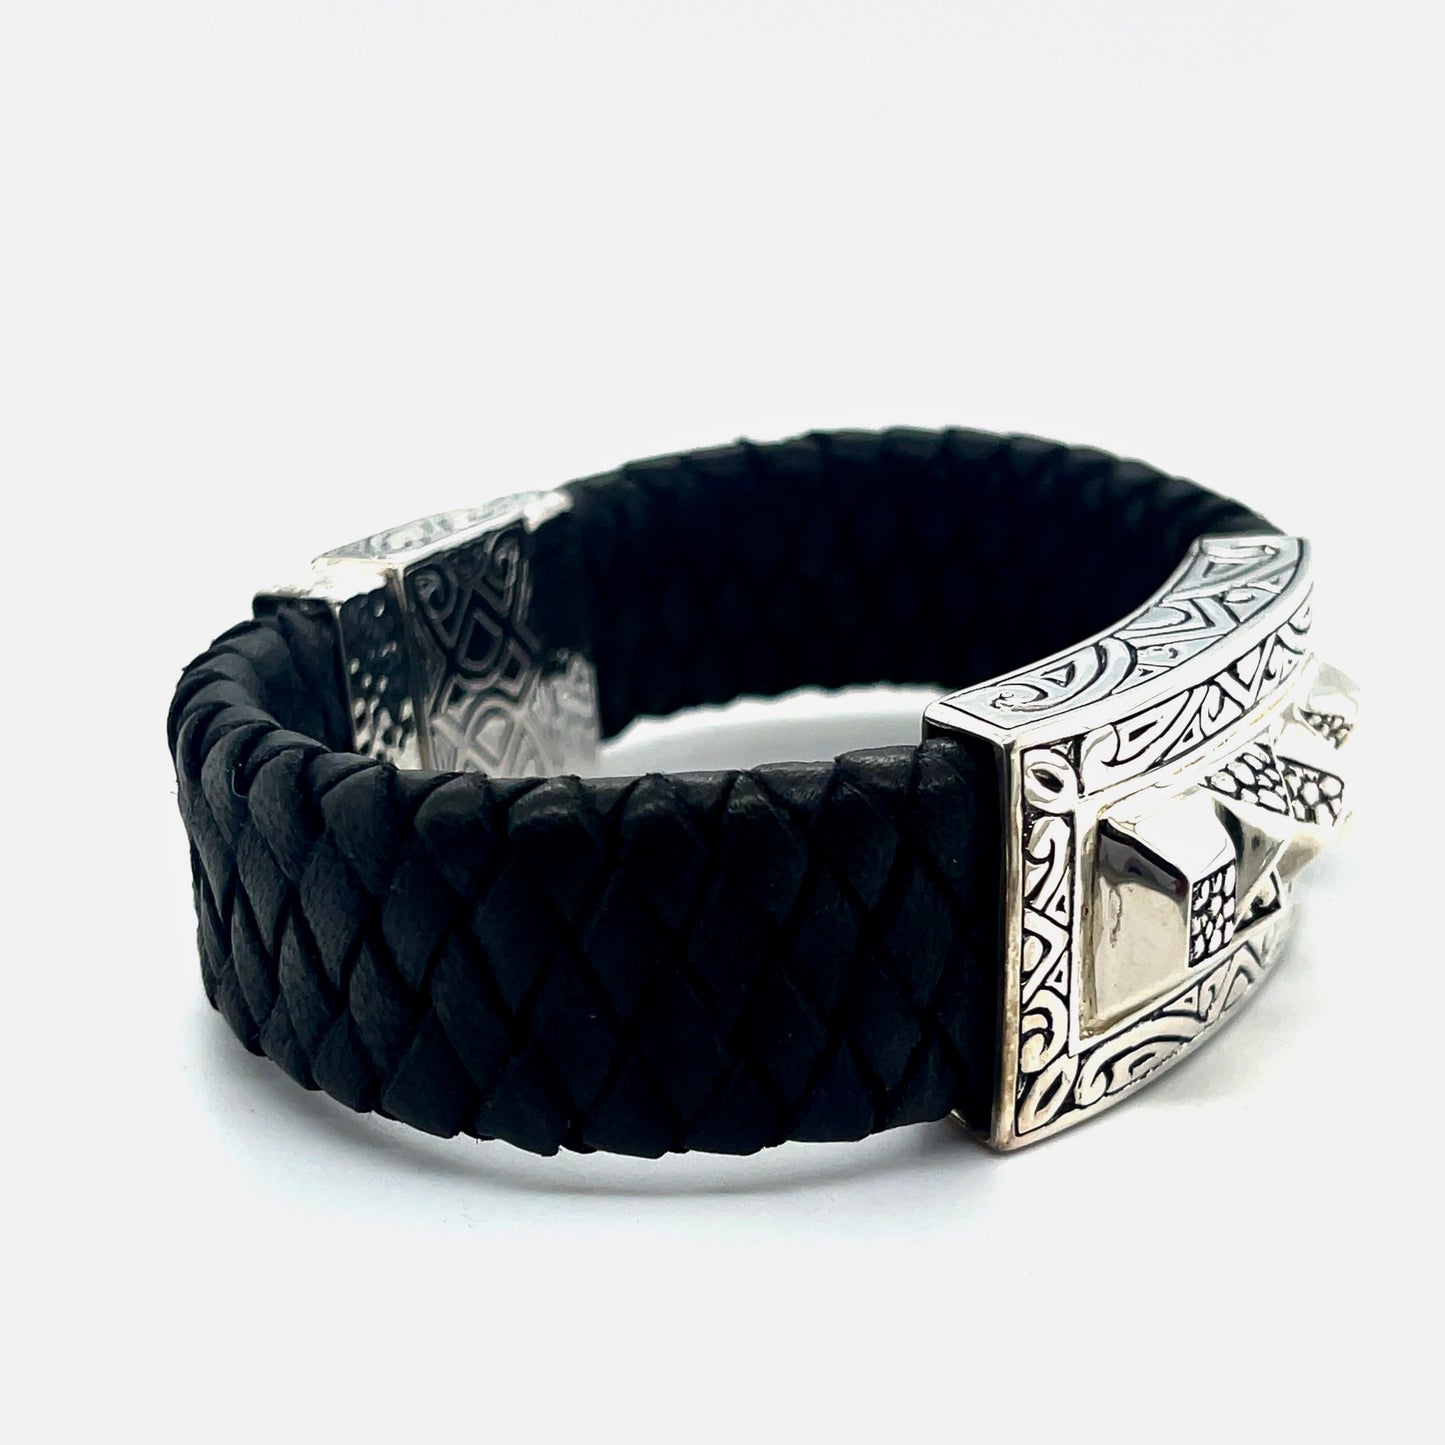 Silver and Leather bracelet